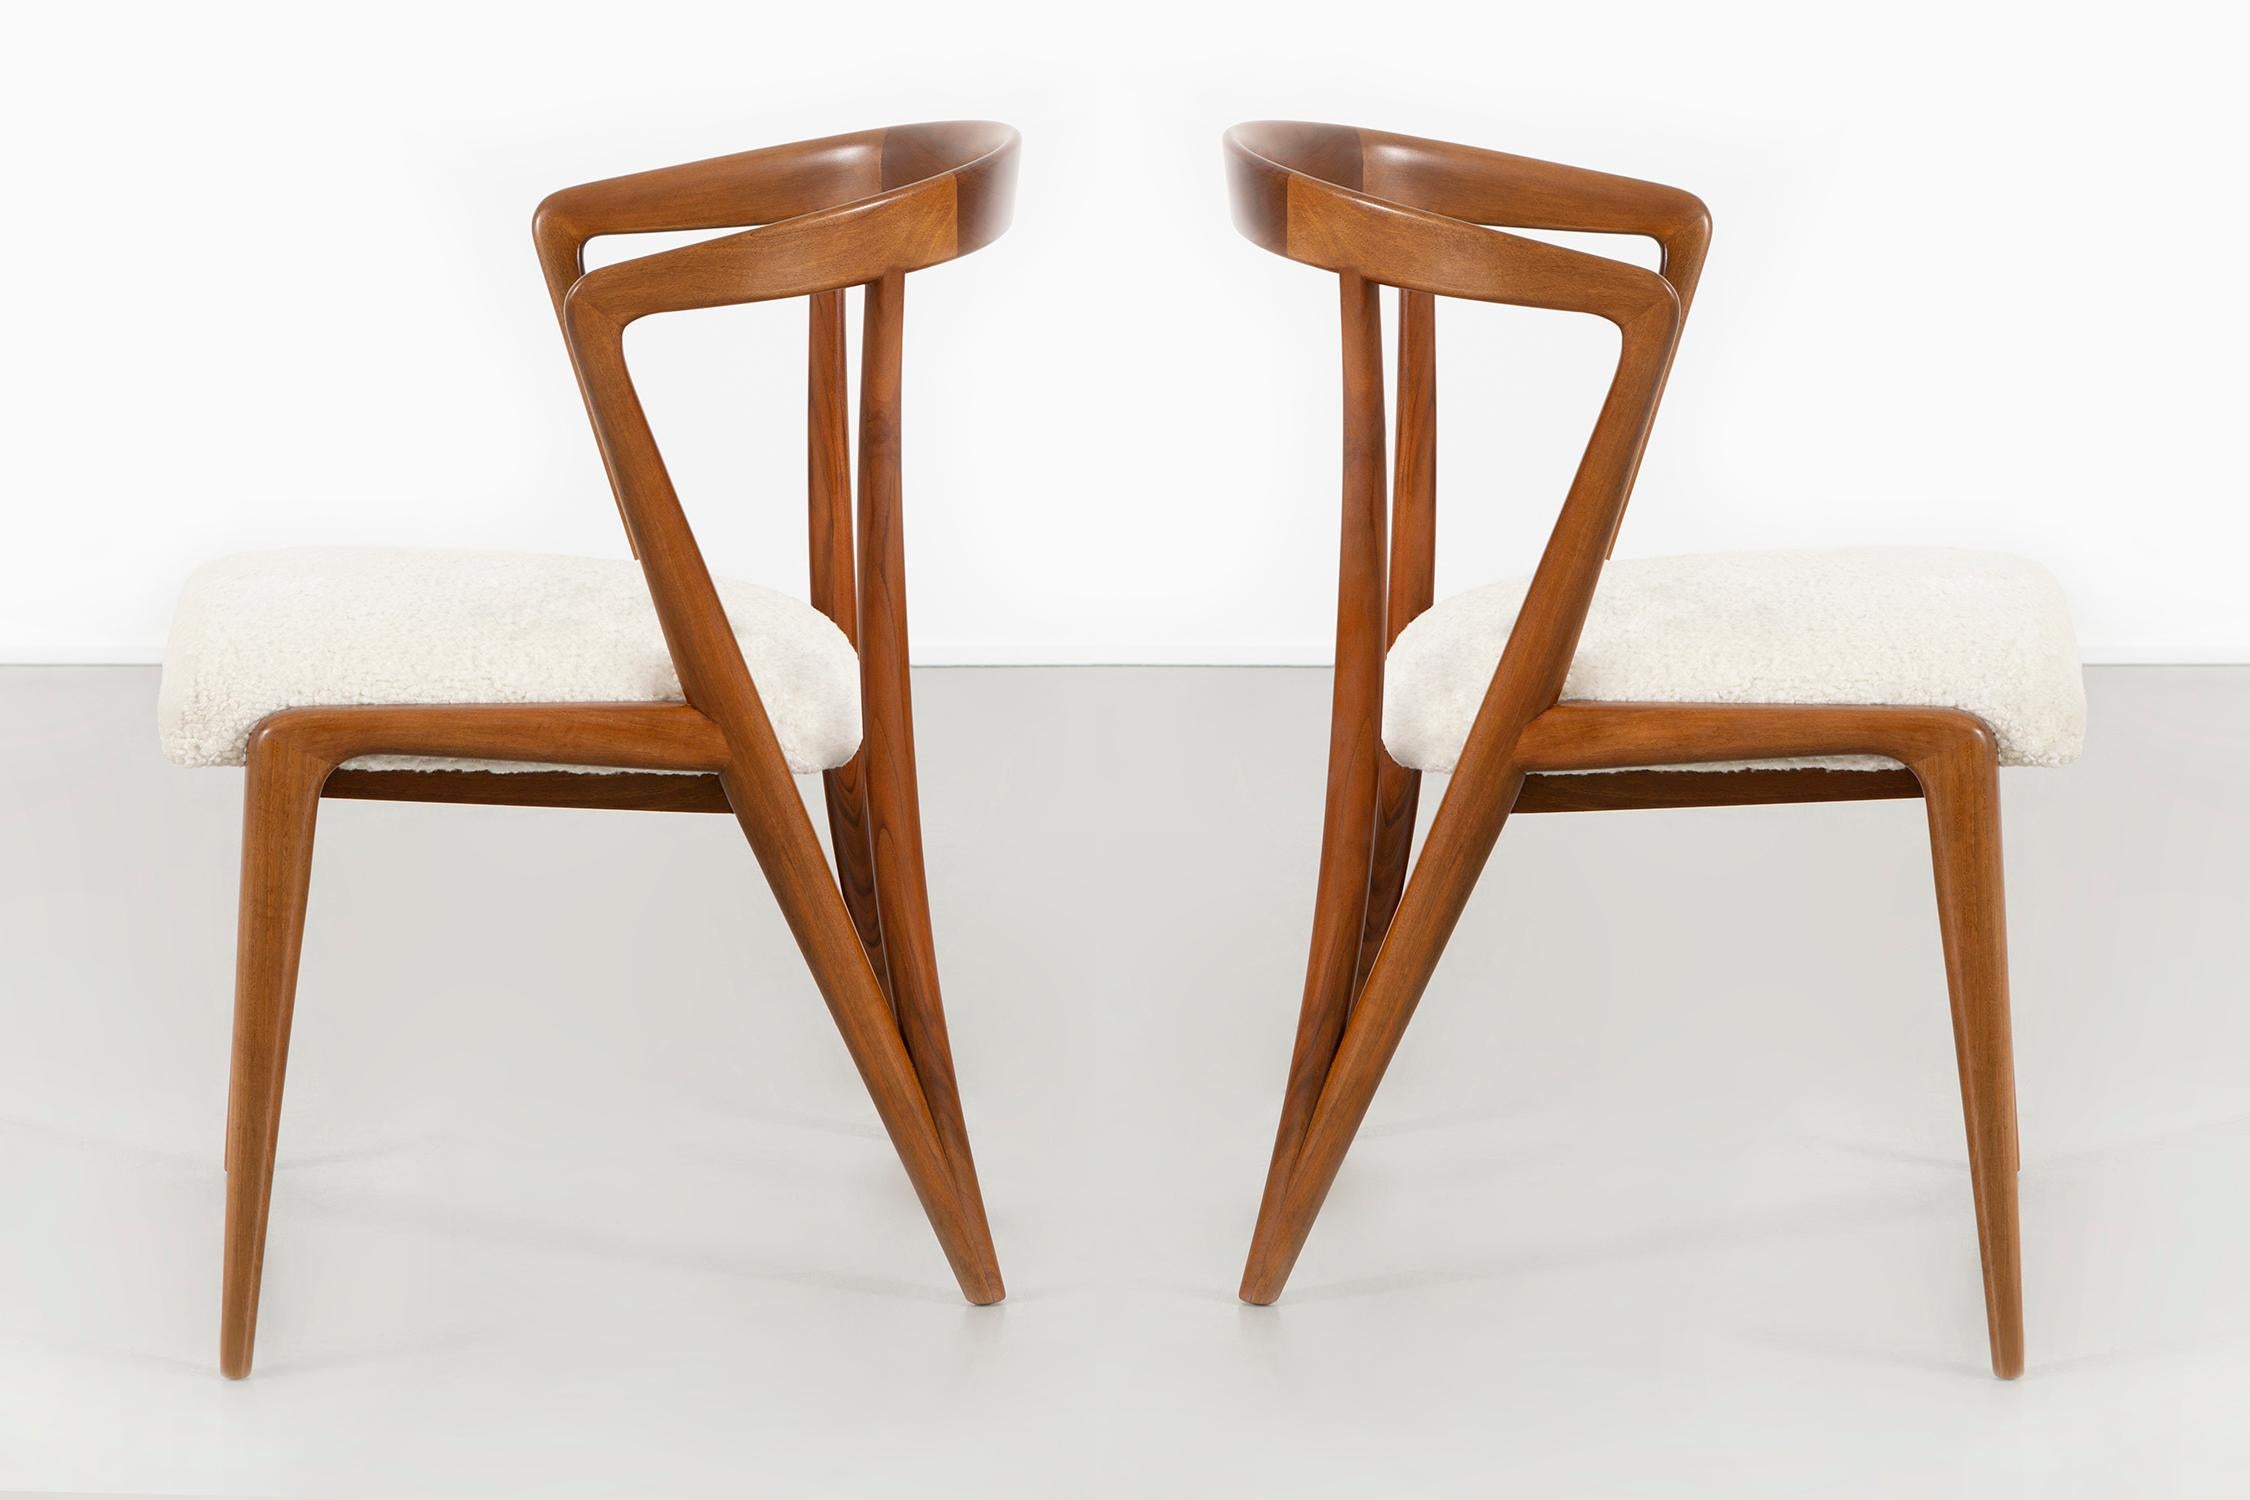 Italian Set of Mid-Century Modern Bertha Schaefer for Singer and Sons Dining Chairs